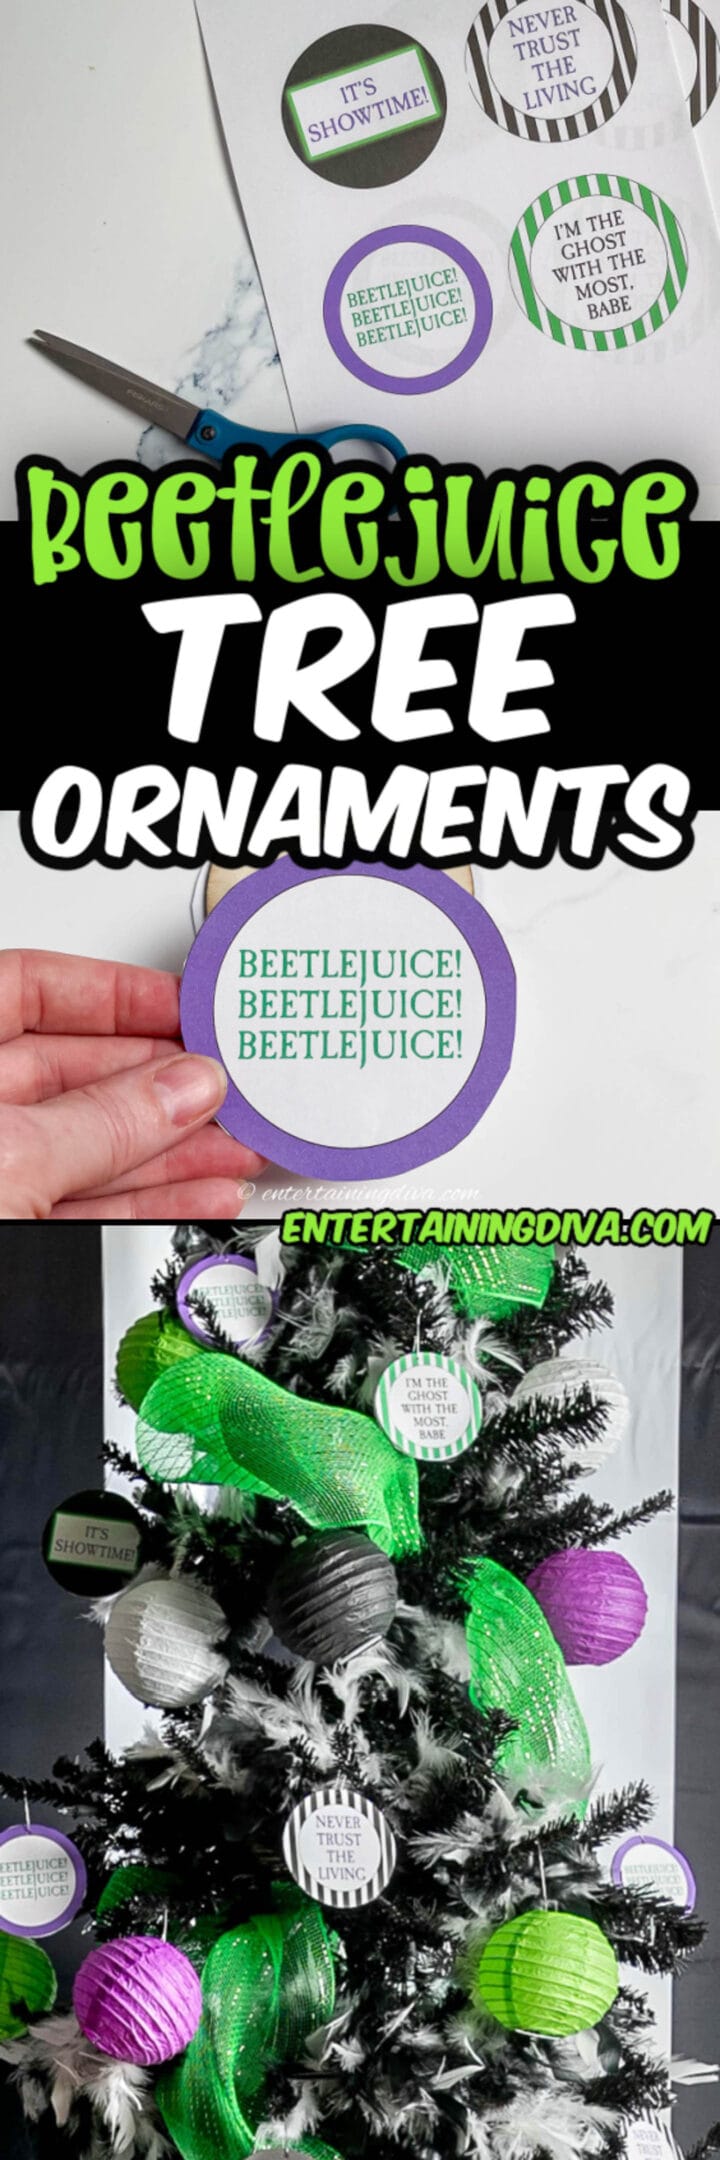 DIY Beetlejuice tree ornaments featuring a picture of a tree ornament with the words refferee juice.